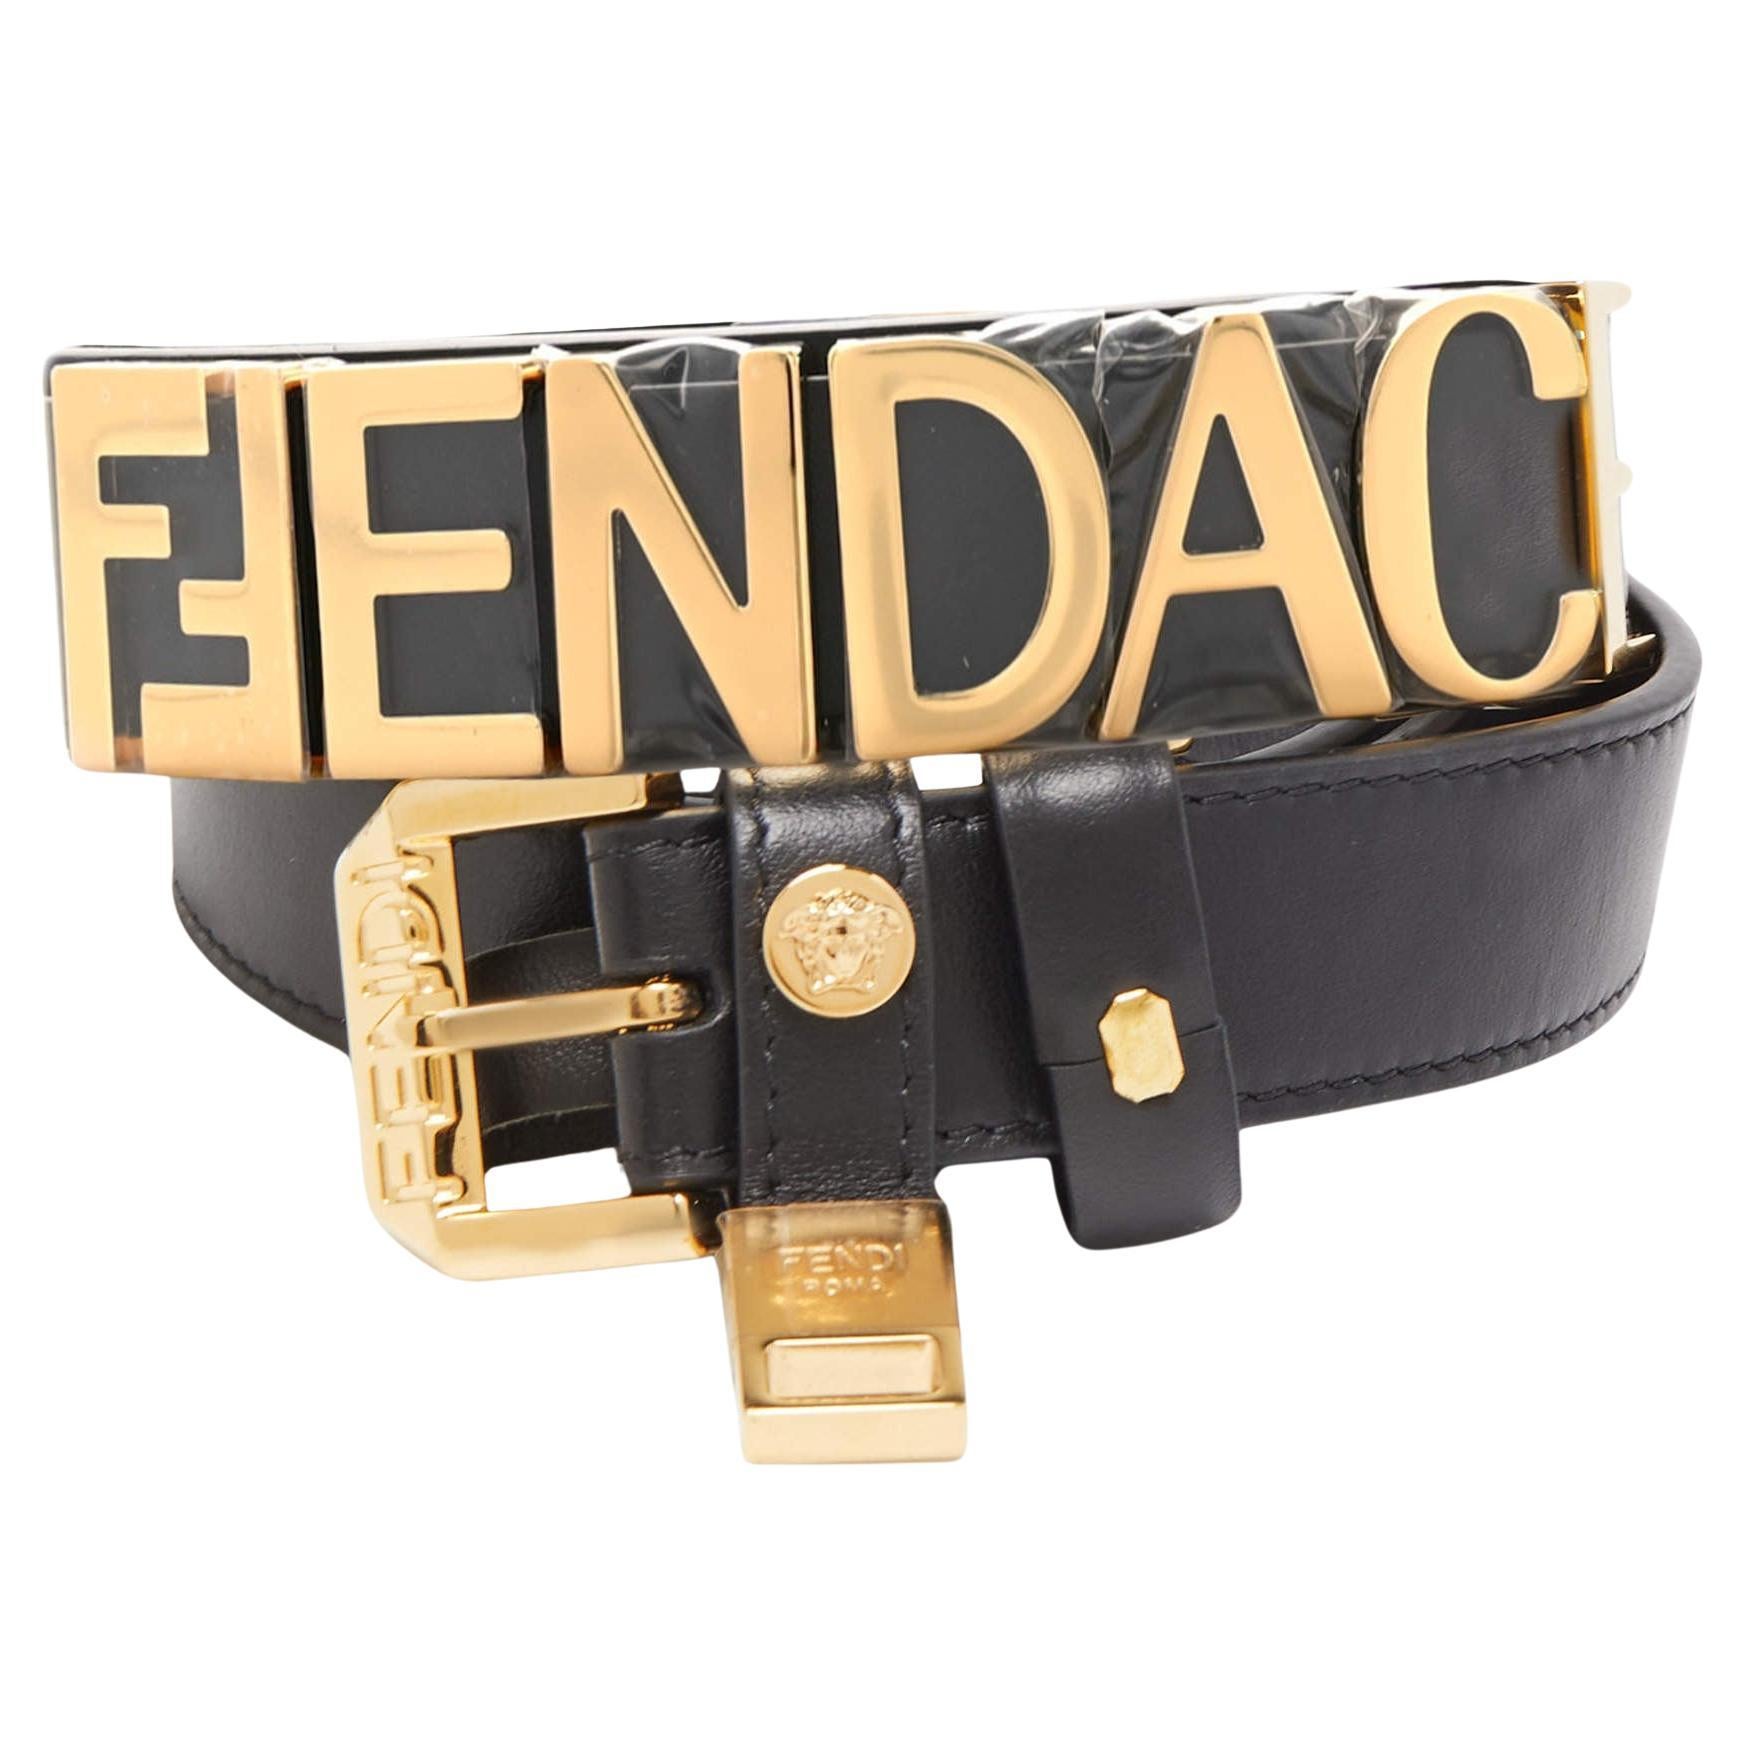 Are Fendi belts made in italy?